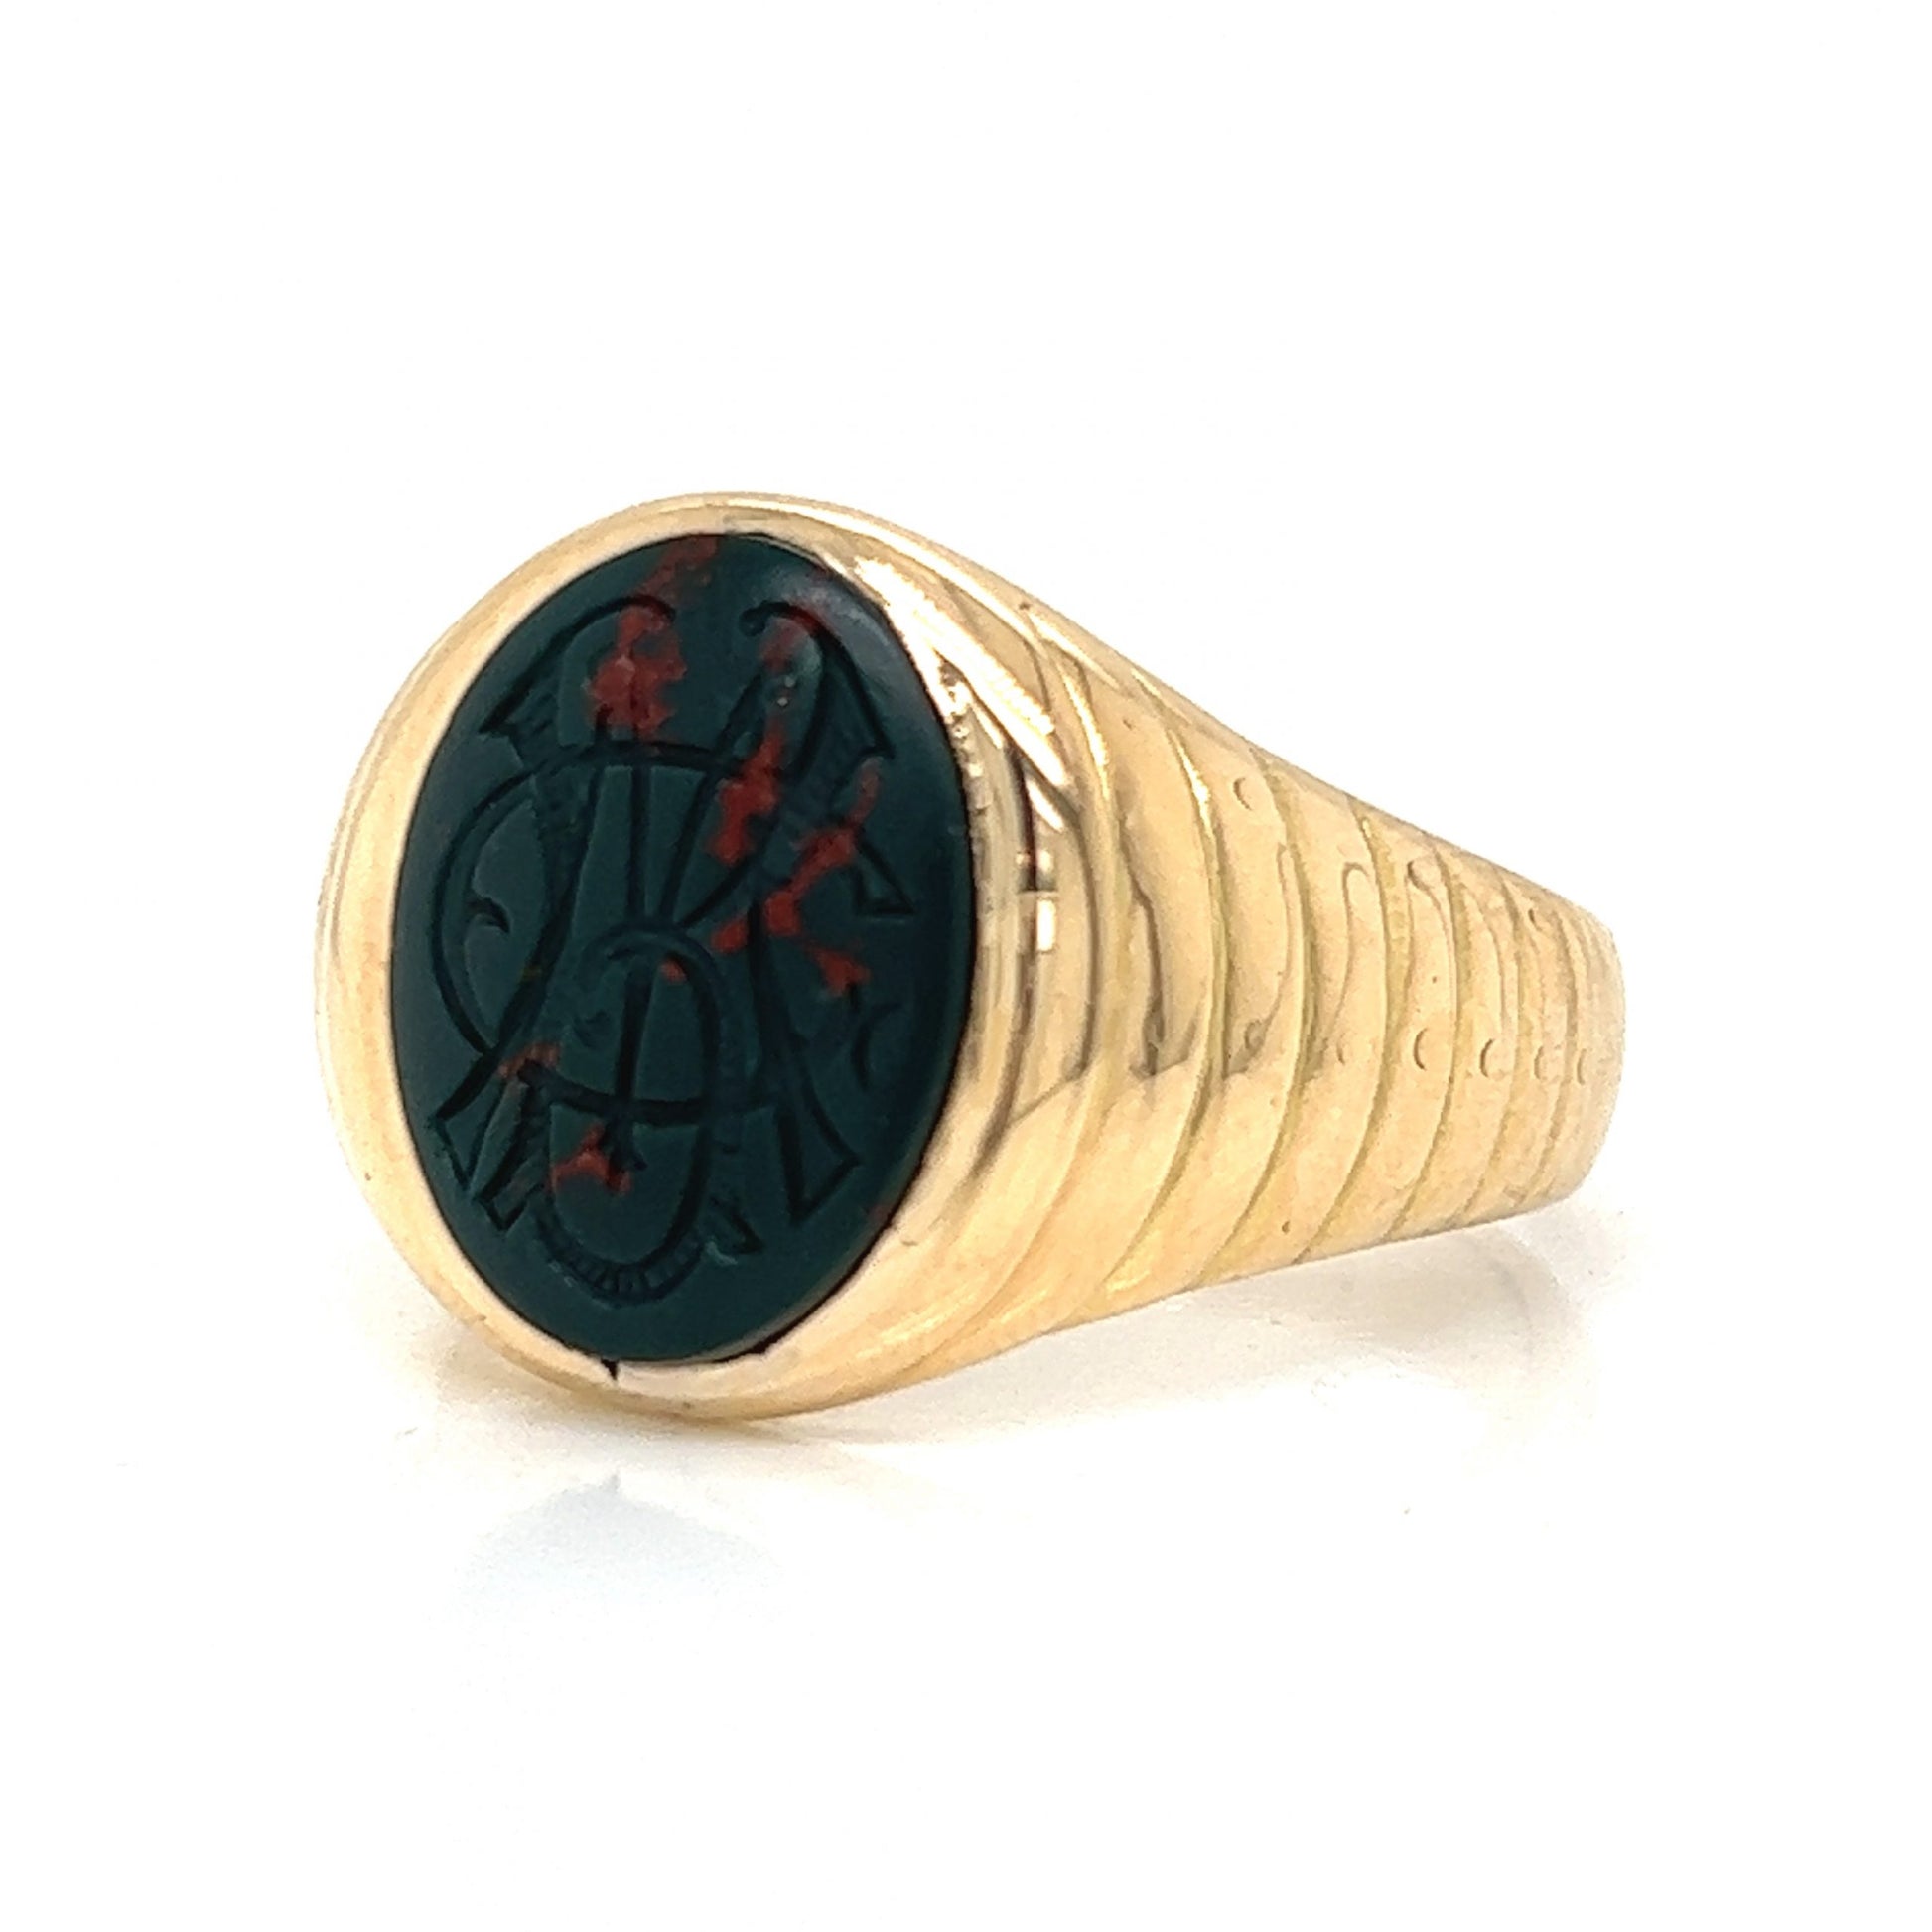 Vintage Men's Carved Bloodstone Ring in 14k Yellow GoldComposition: 14 Karat Yellow GoldRing Size: 10Total Gram Weight: 12.9 gInscription: 14k